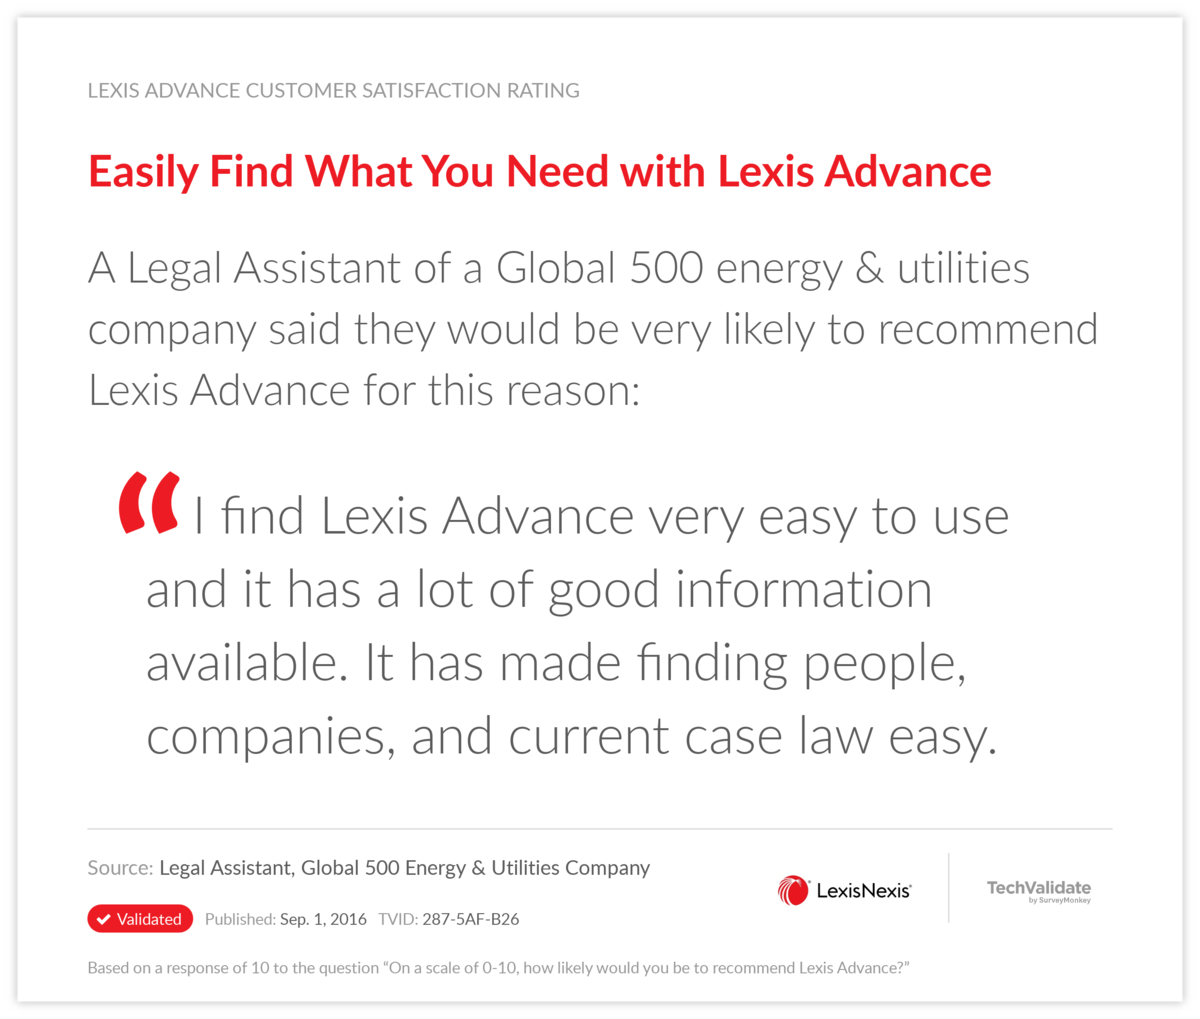 Easily Find What You Need with Lexis Advance